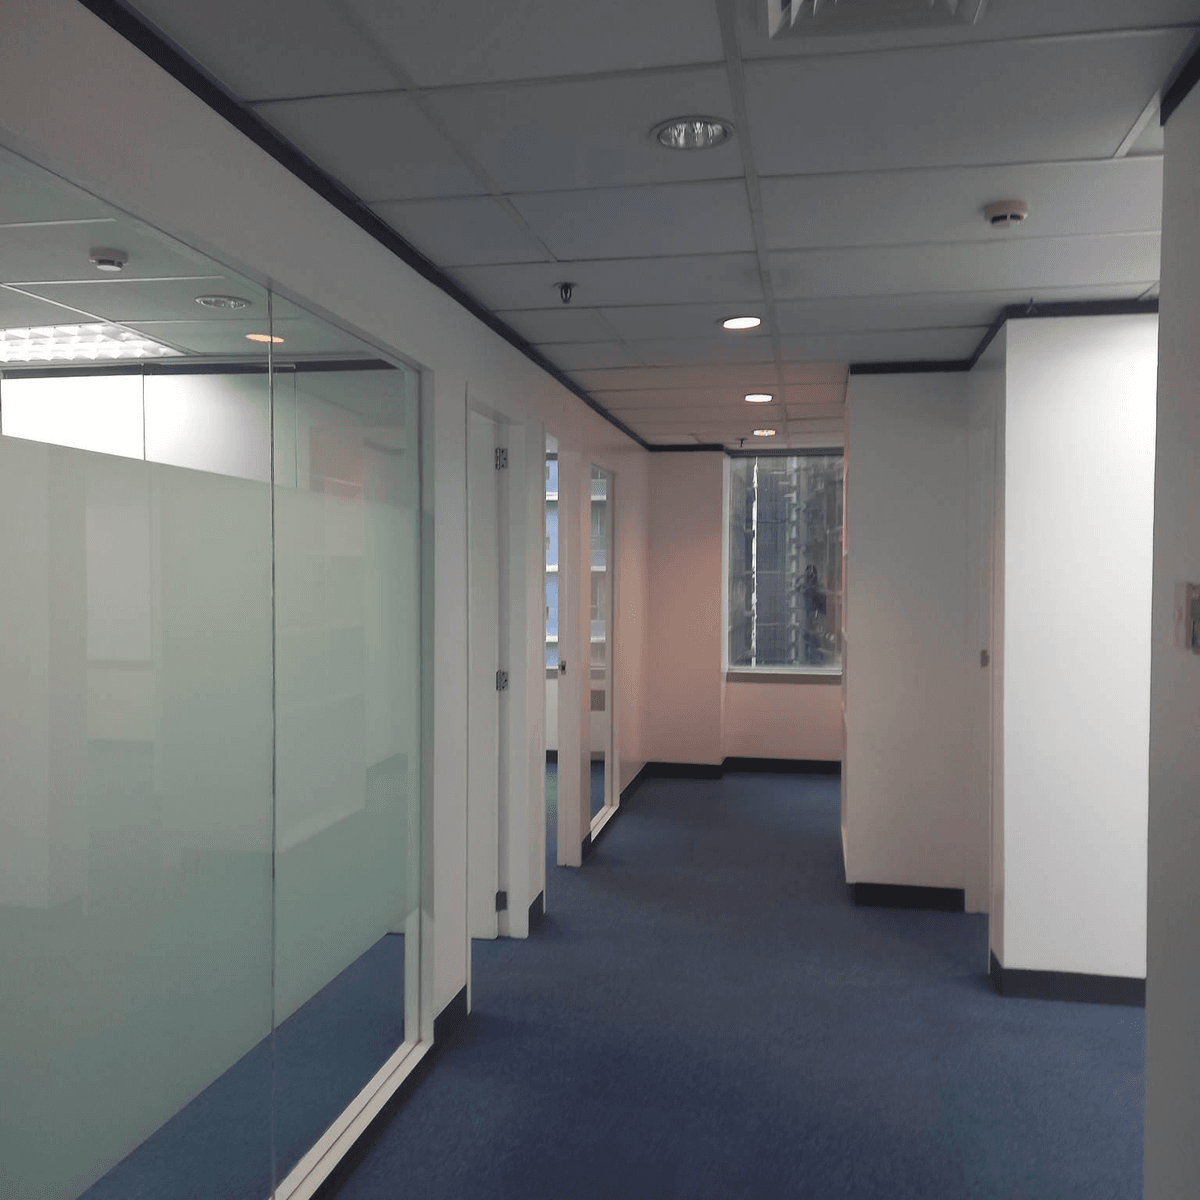 For Rent Lease Office Space Fitted Ortigas Center Pasig 448sqm